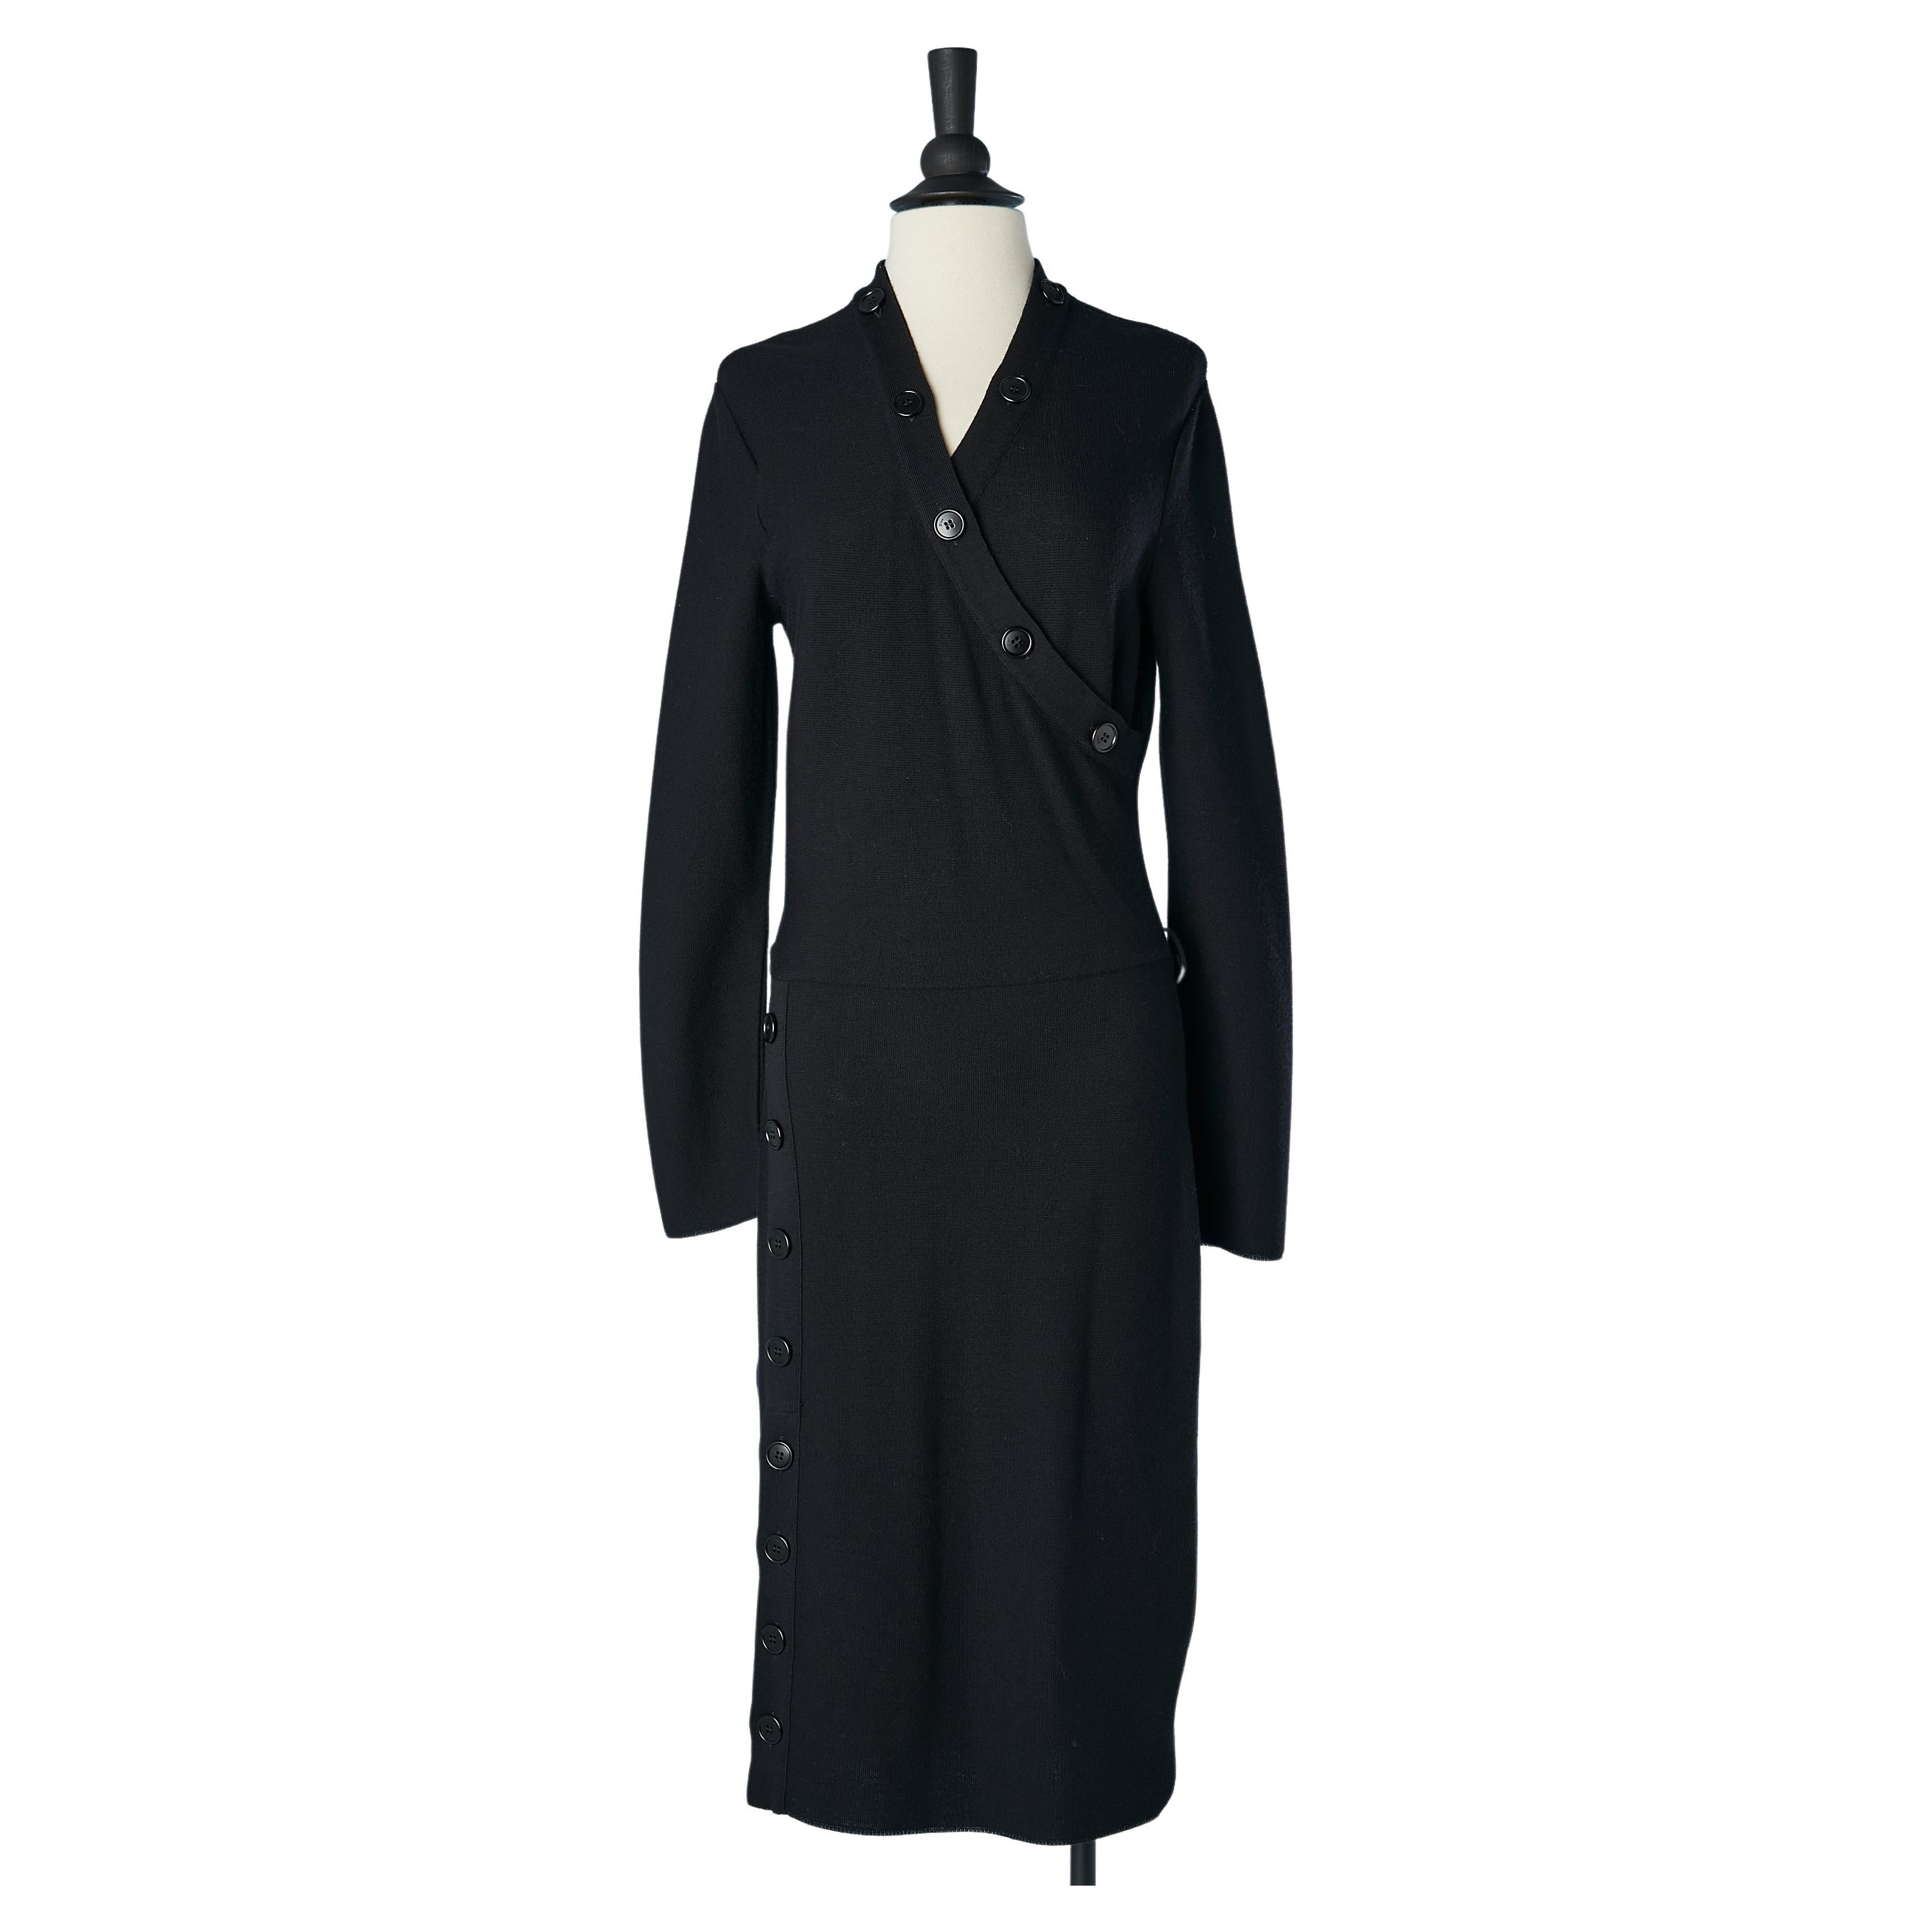 Black knit dress with decorative branded button on the edge Christian Dior Paris For Sale